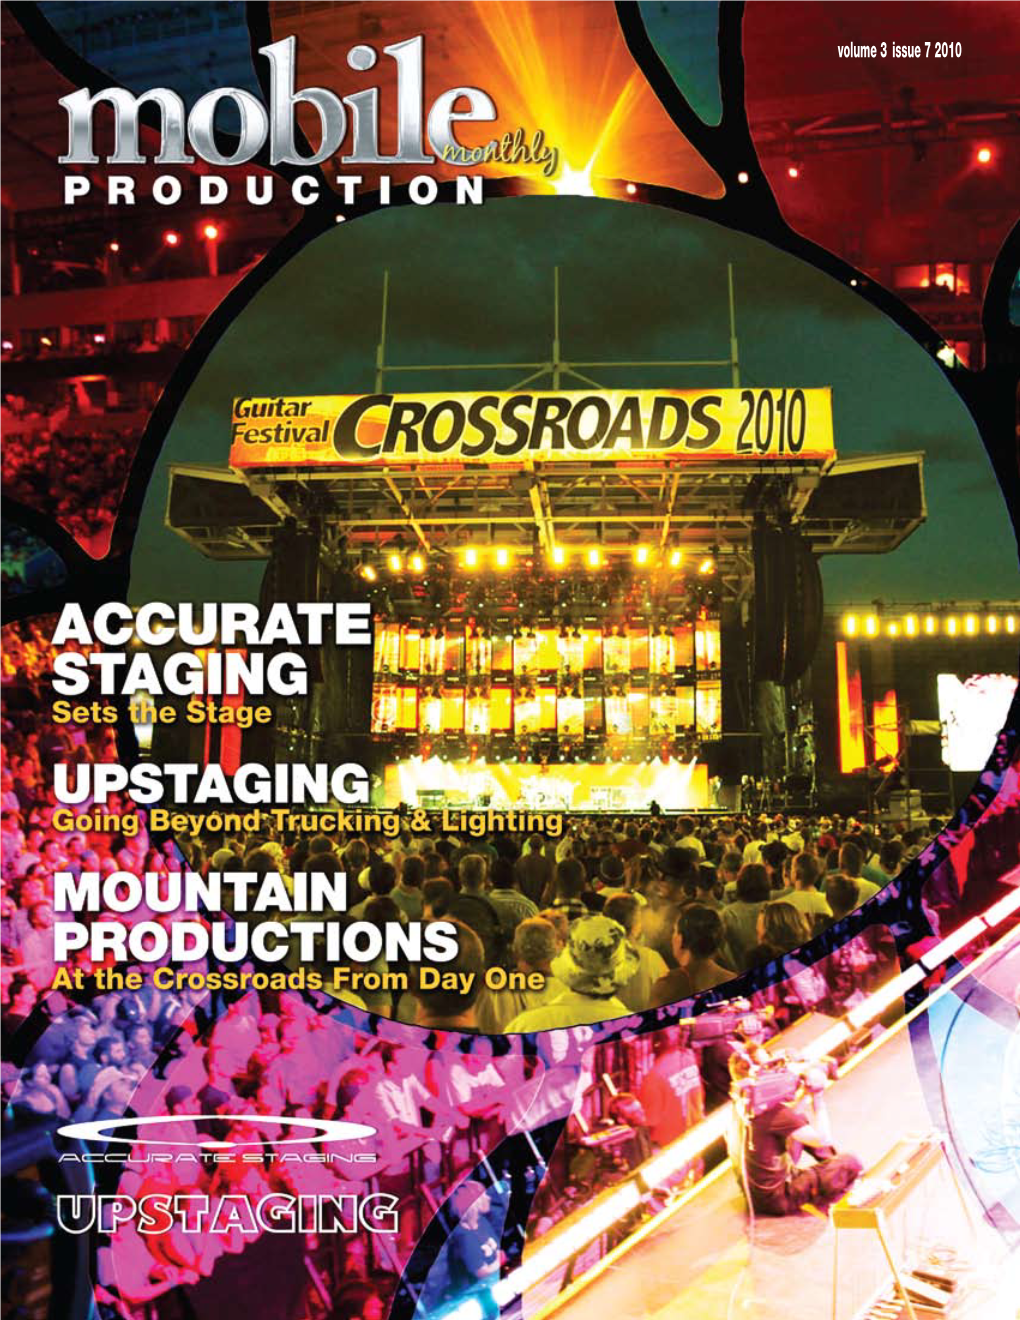 Volume 3 Issue 7 2010 Your Access to Performance with Passion